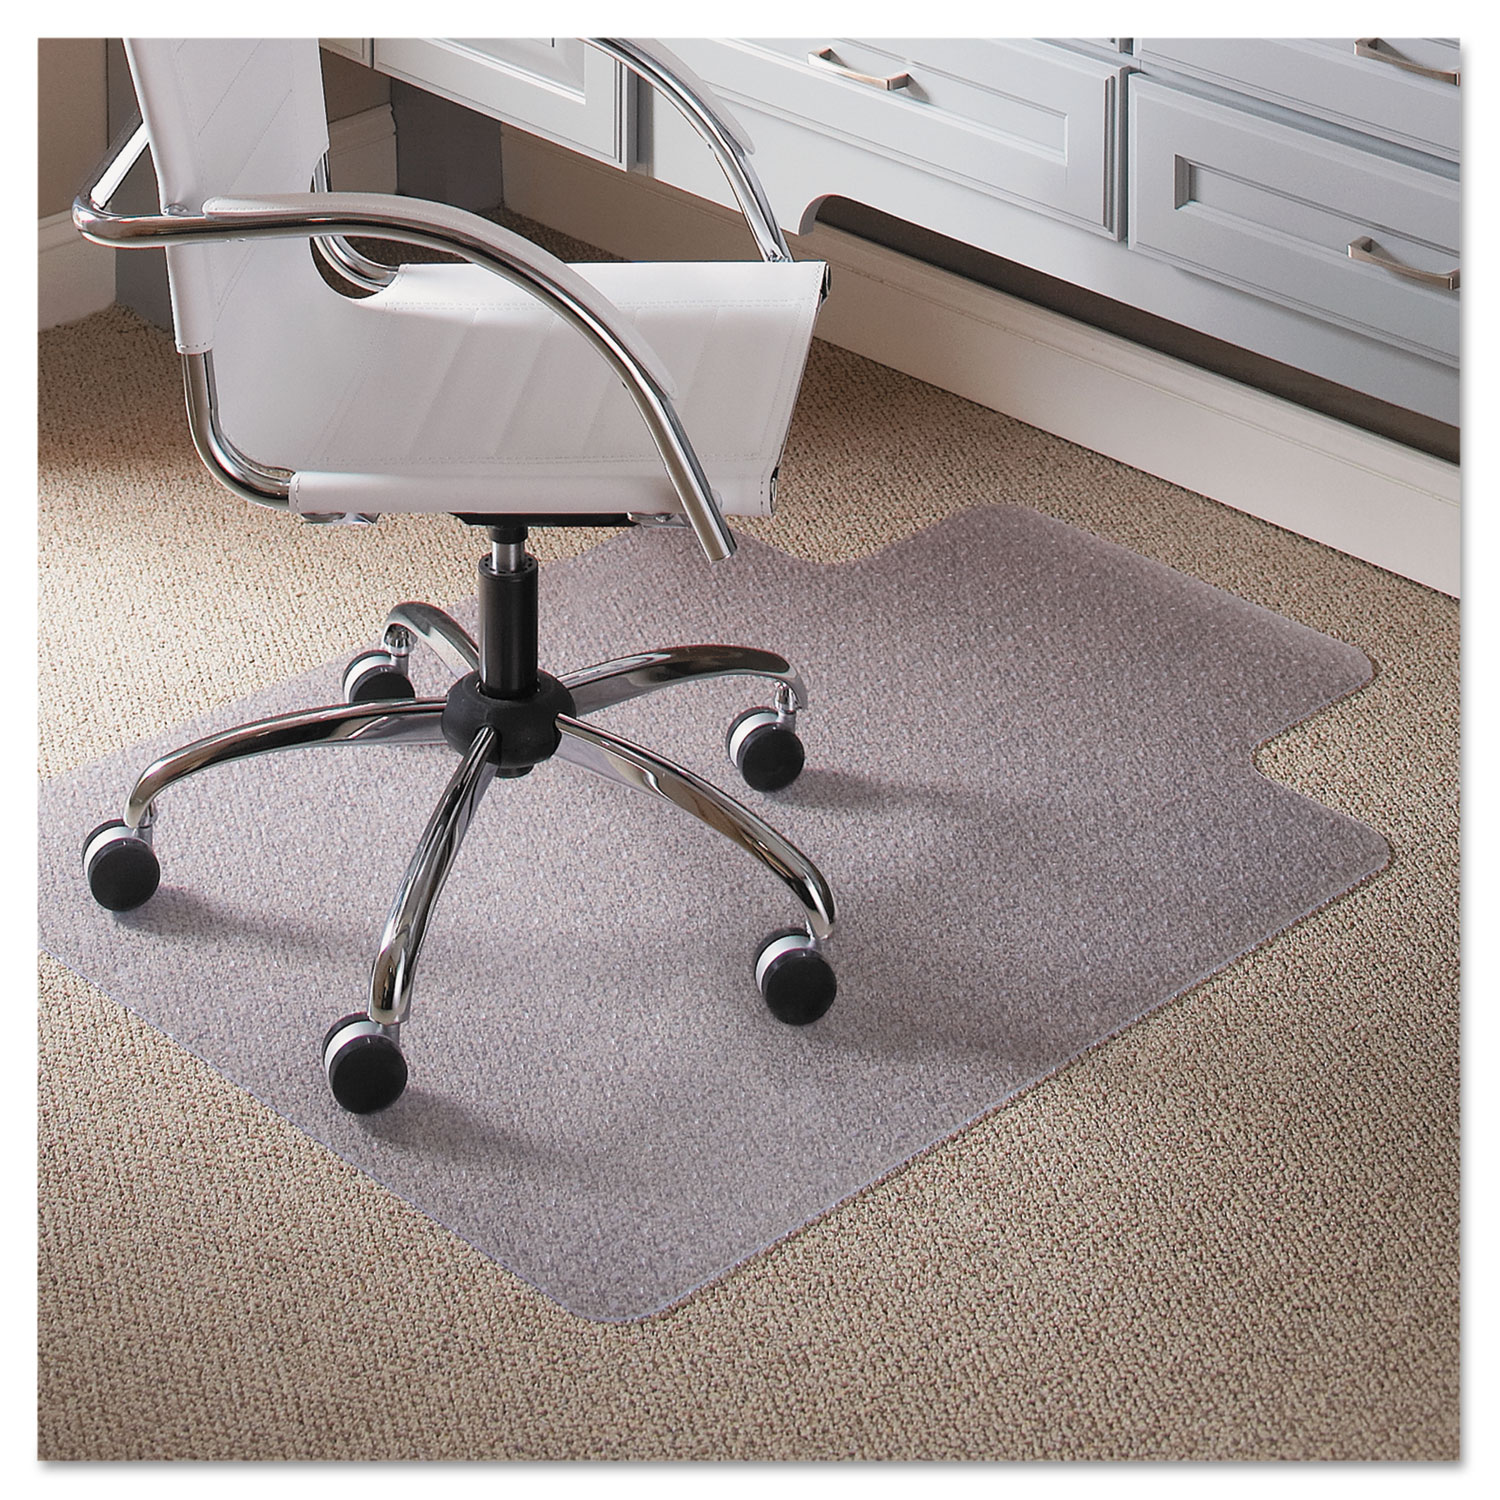 45 x 53 Lip Chair Mat, Task Series AnchorBar for Carpet up to 1/4